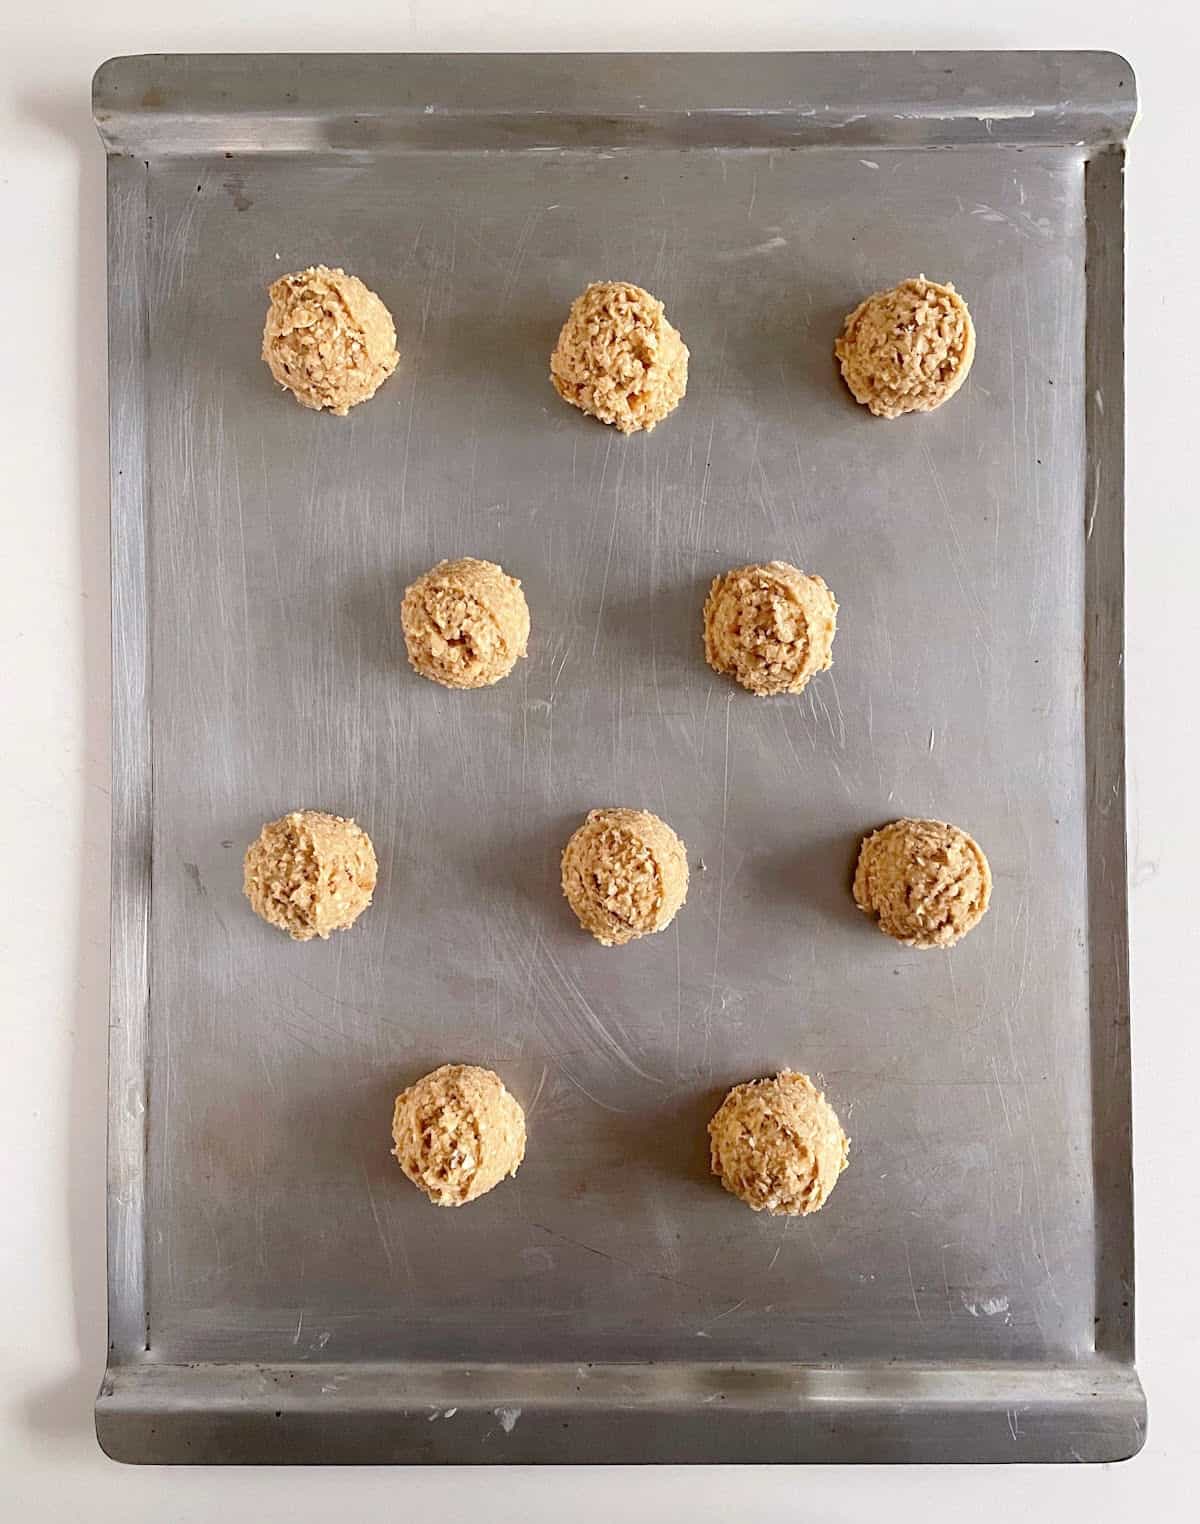 Metal cookie sheet with scoops of oatmeal cookie dough. Top view. 